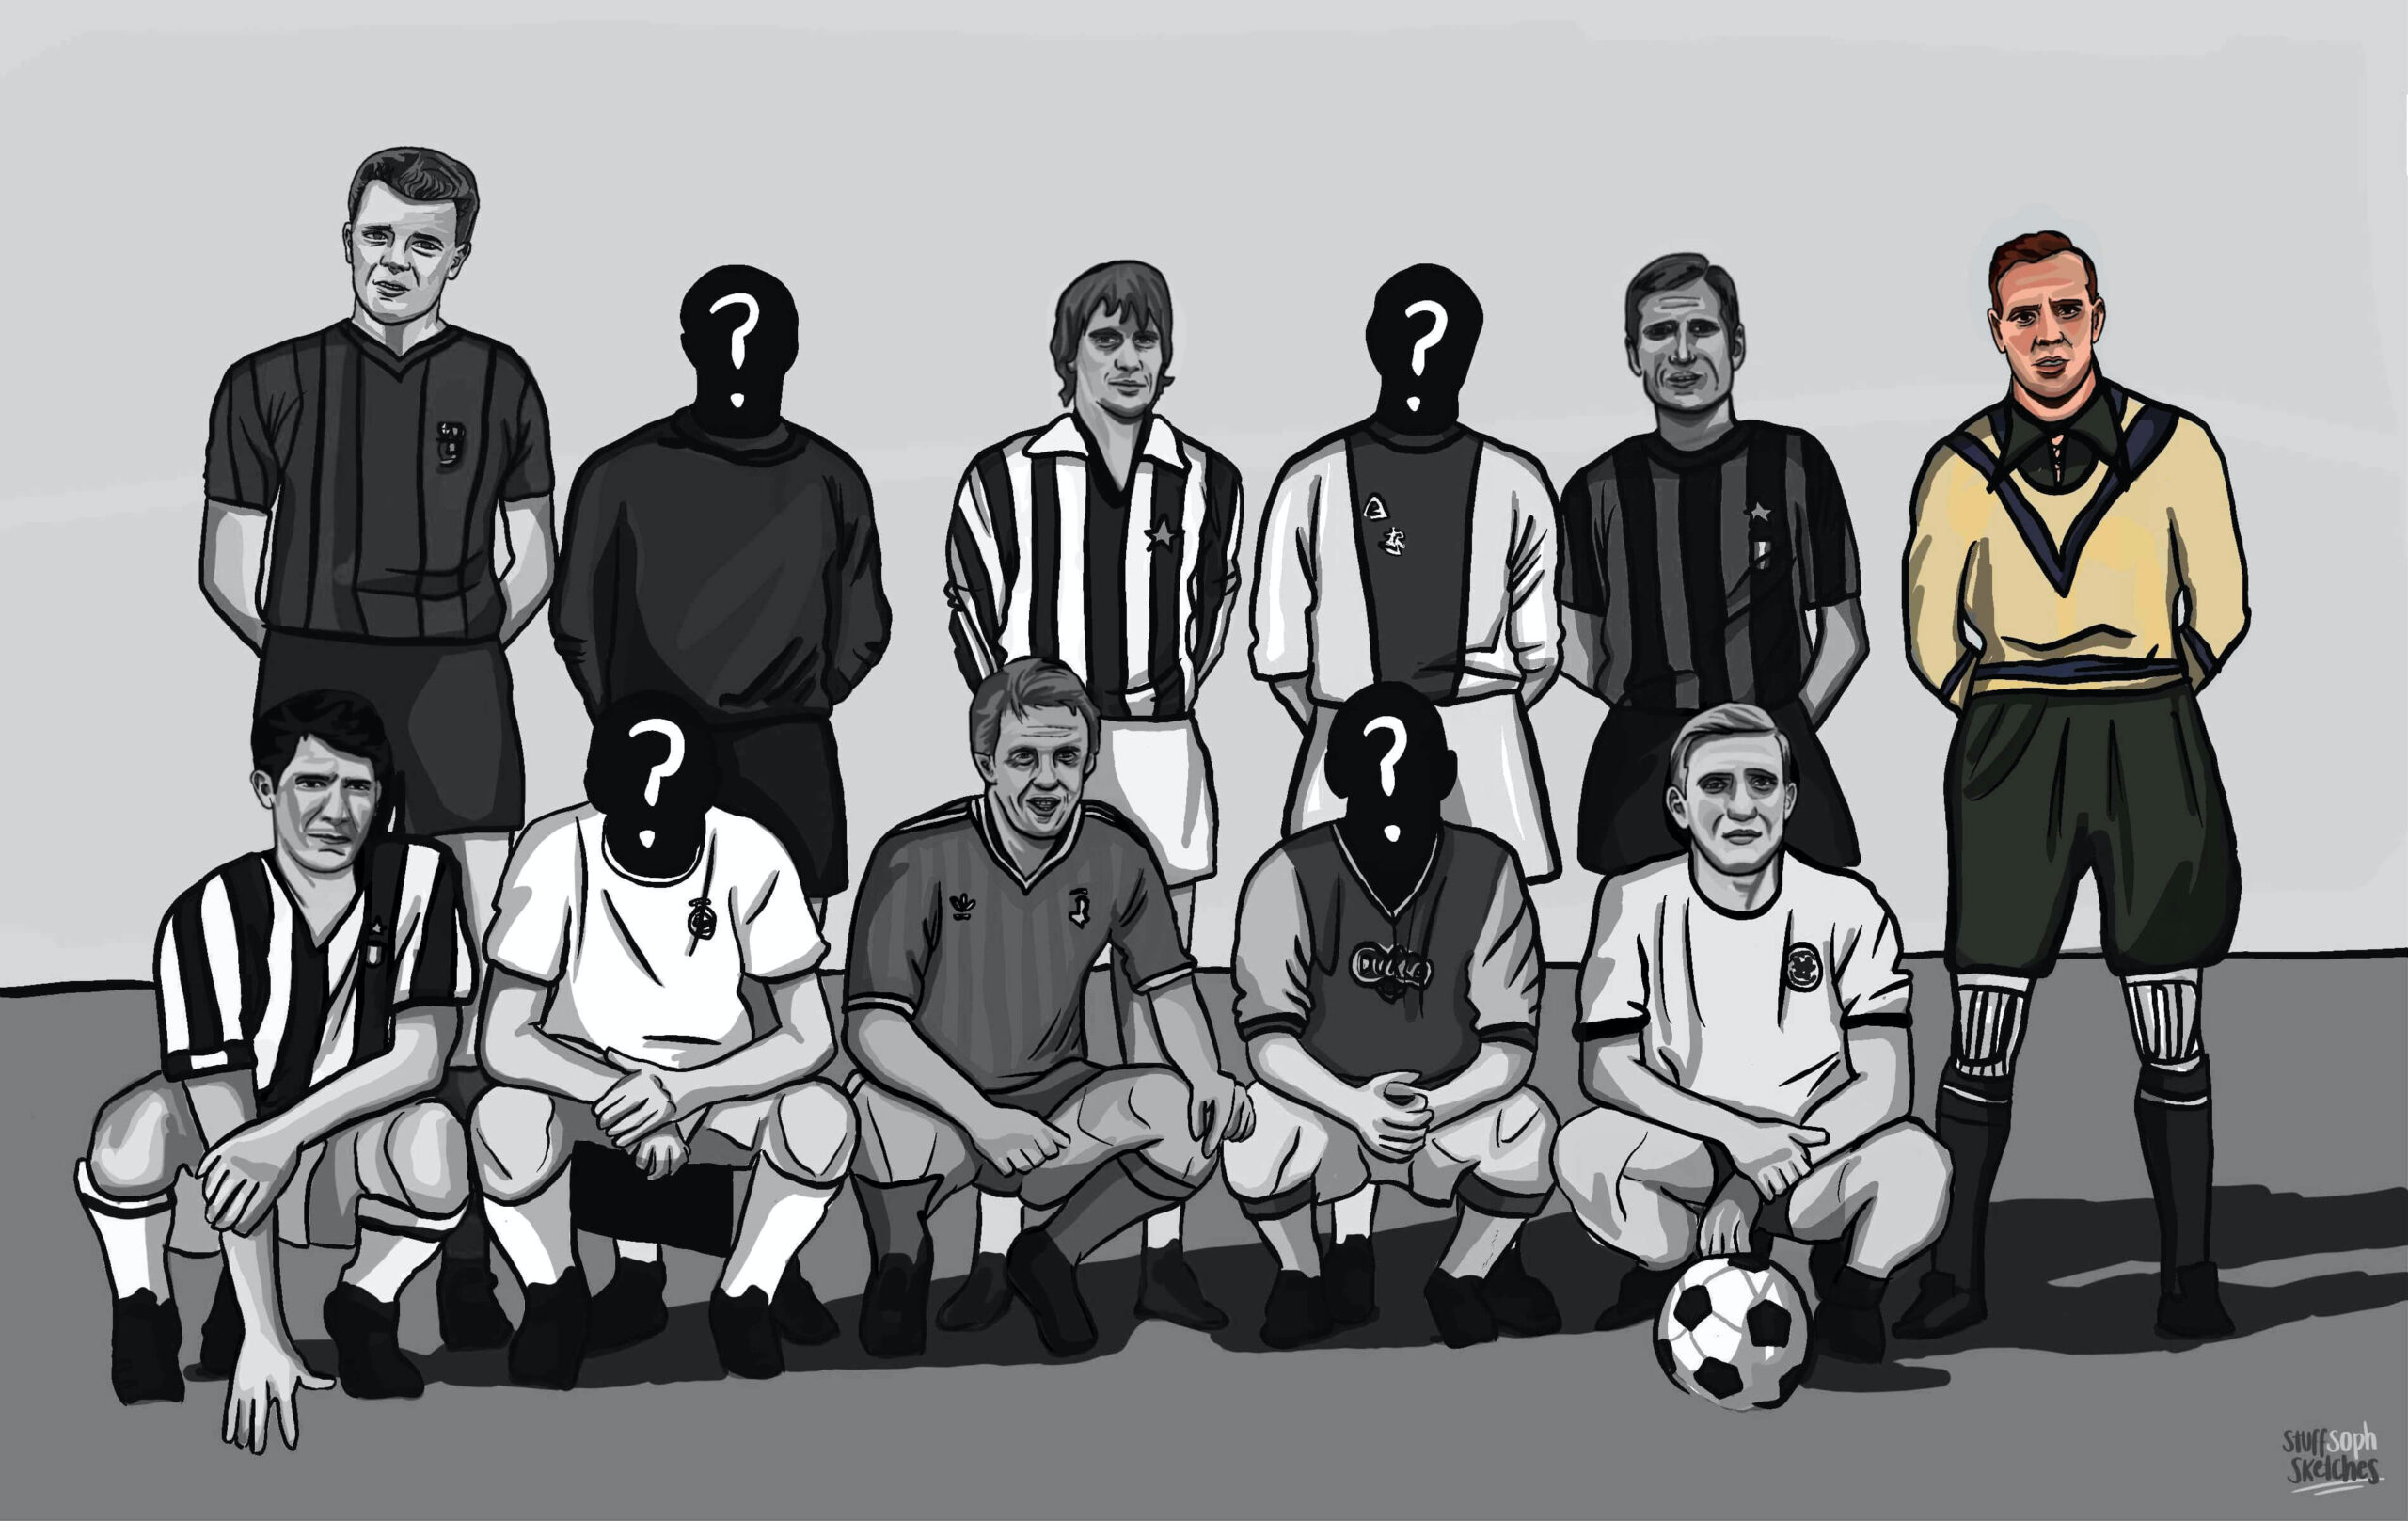 Ricardo Zamora in colour, amongst the forgotten eleven lineup in black and white